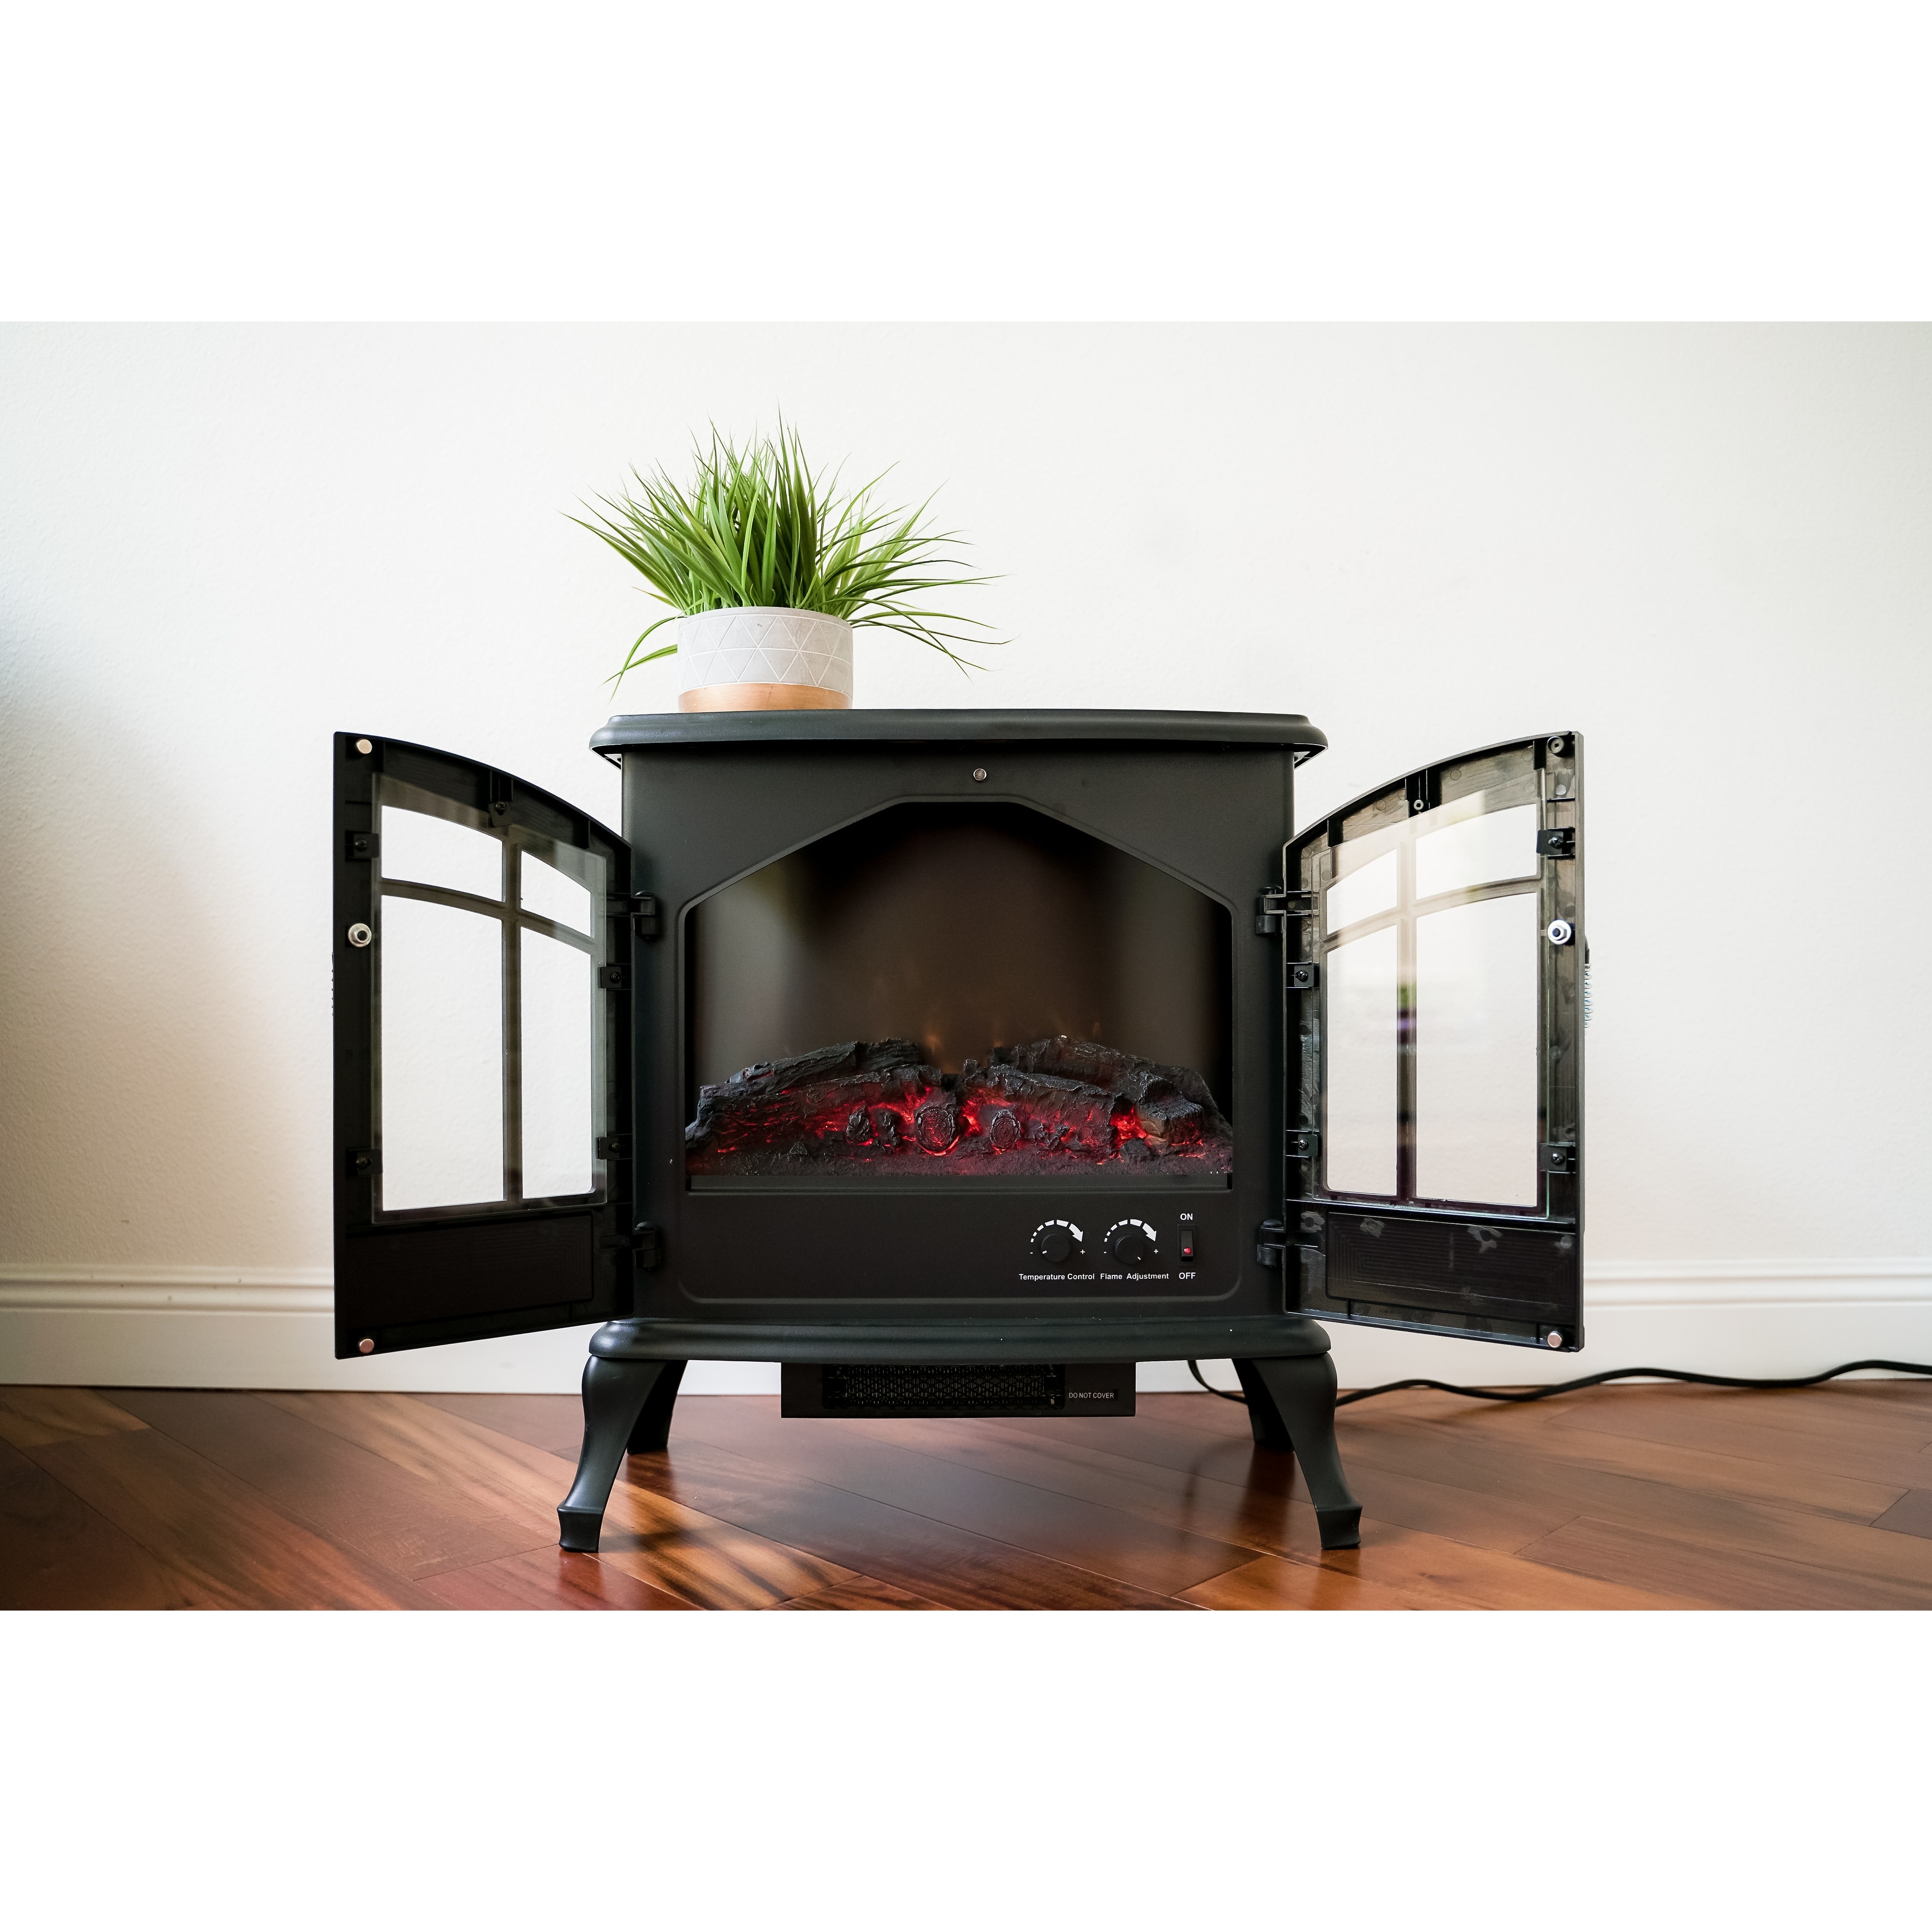 XBrand Insert Fireplace Heater w Remote Control and LED Flame Effect, 32 Inch Long, Black - 2